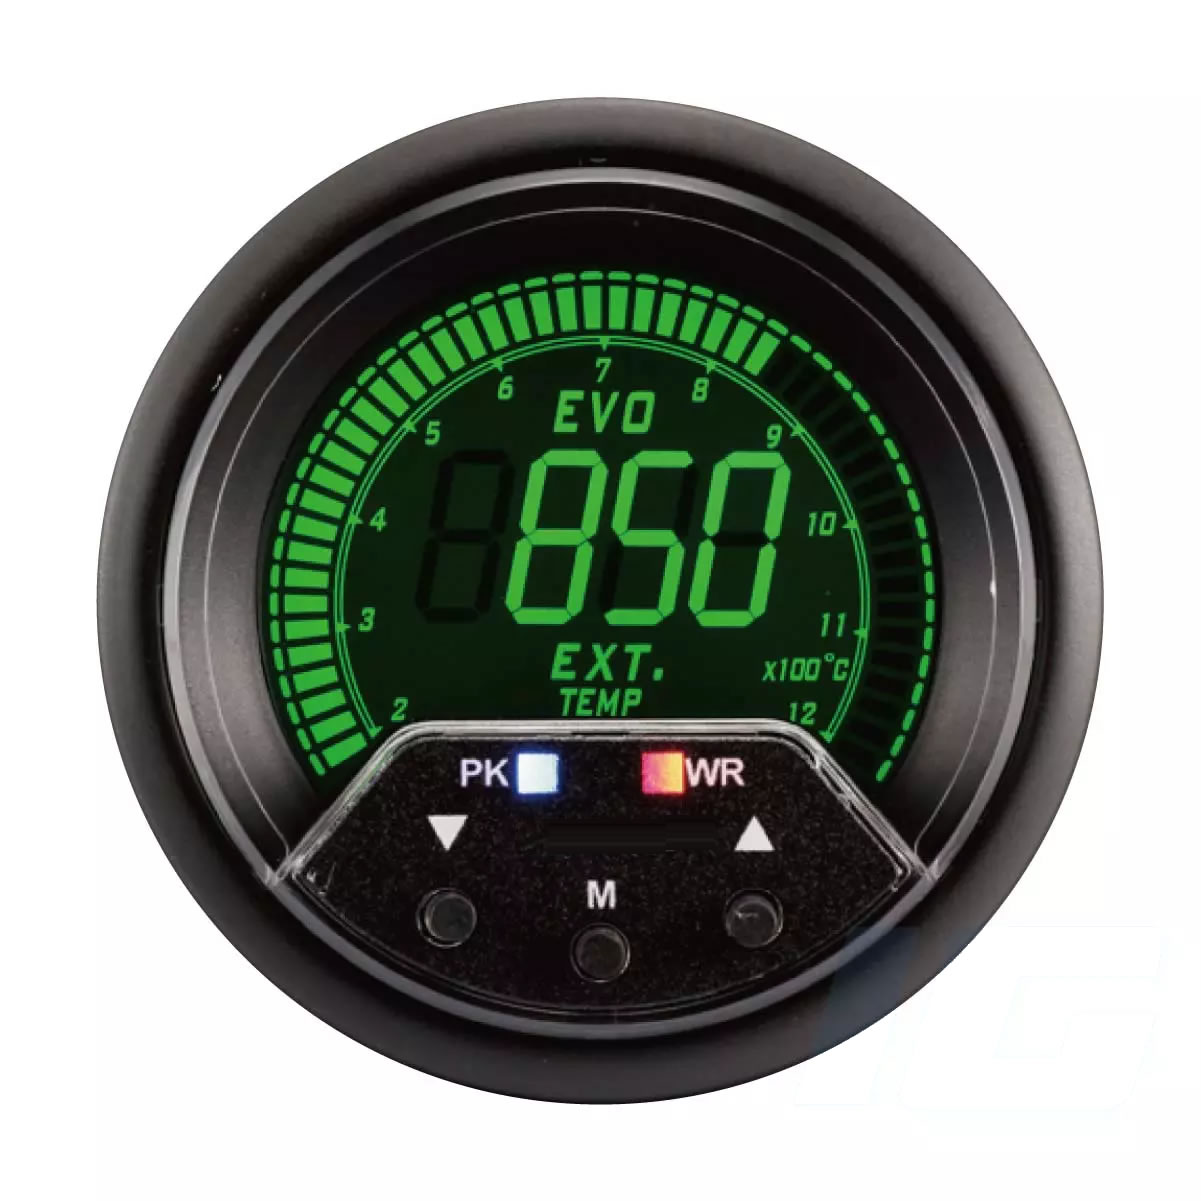 60mm LCD Performance Car Gauges - Exhaust Gas Temp Gauge With Sensor and Warning and Peak For Your Sport Racing Car